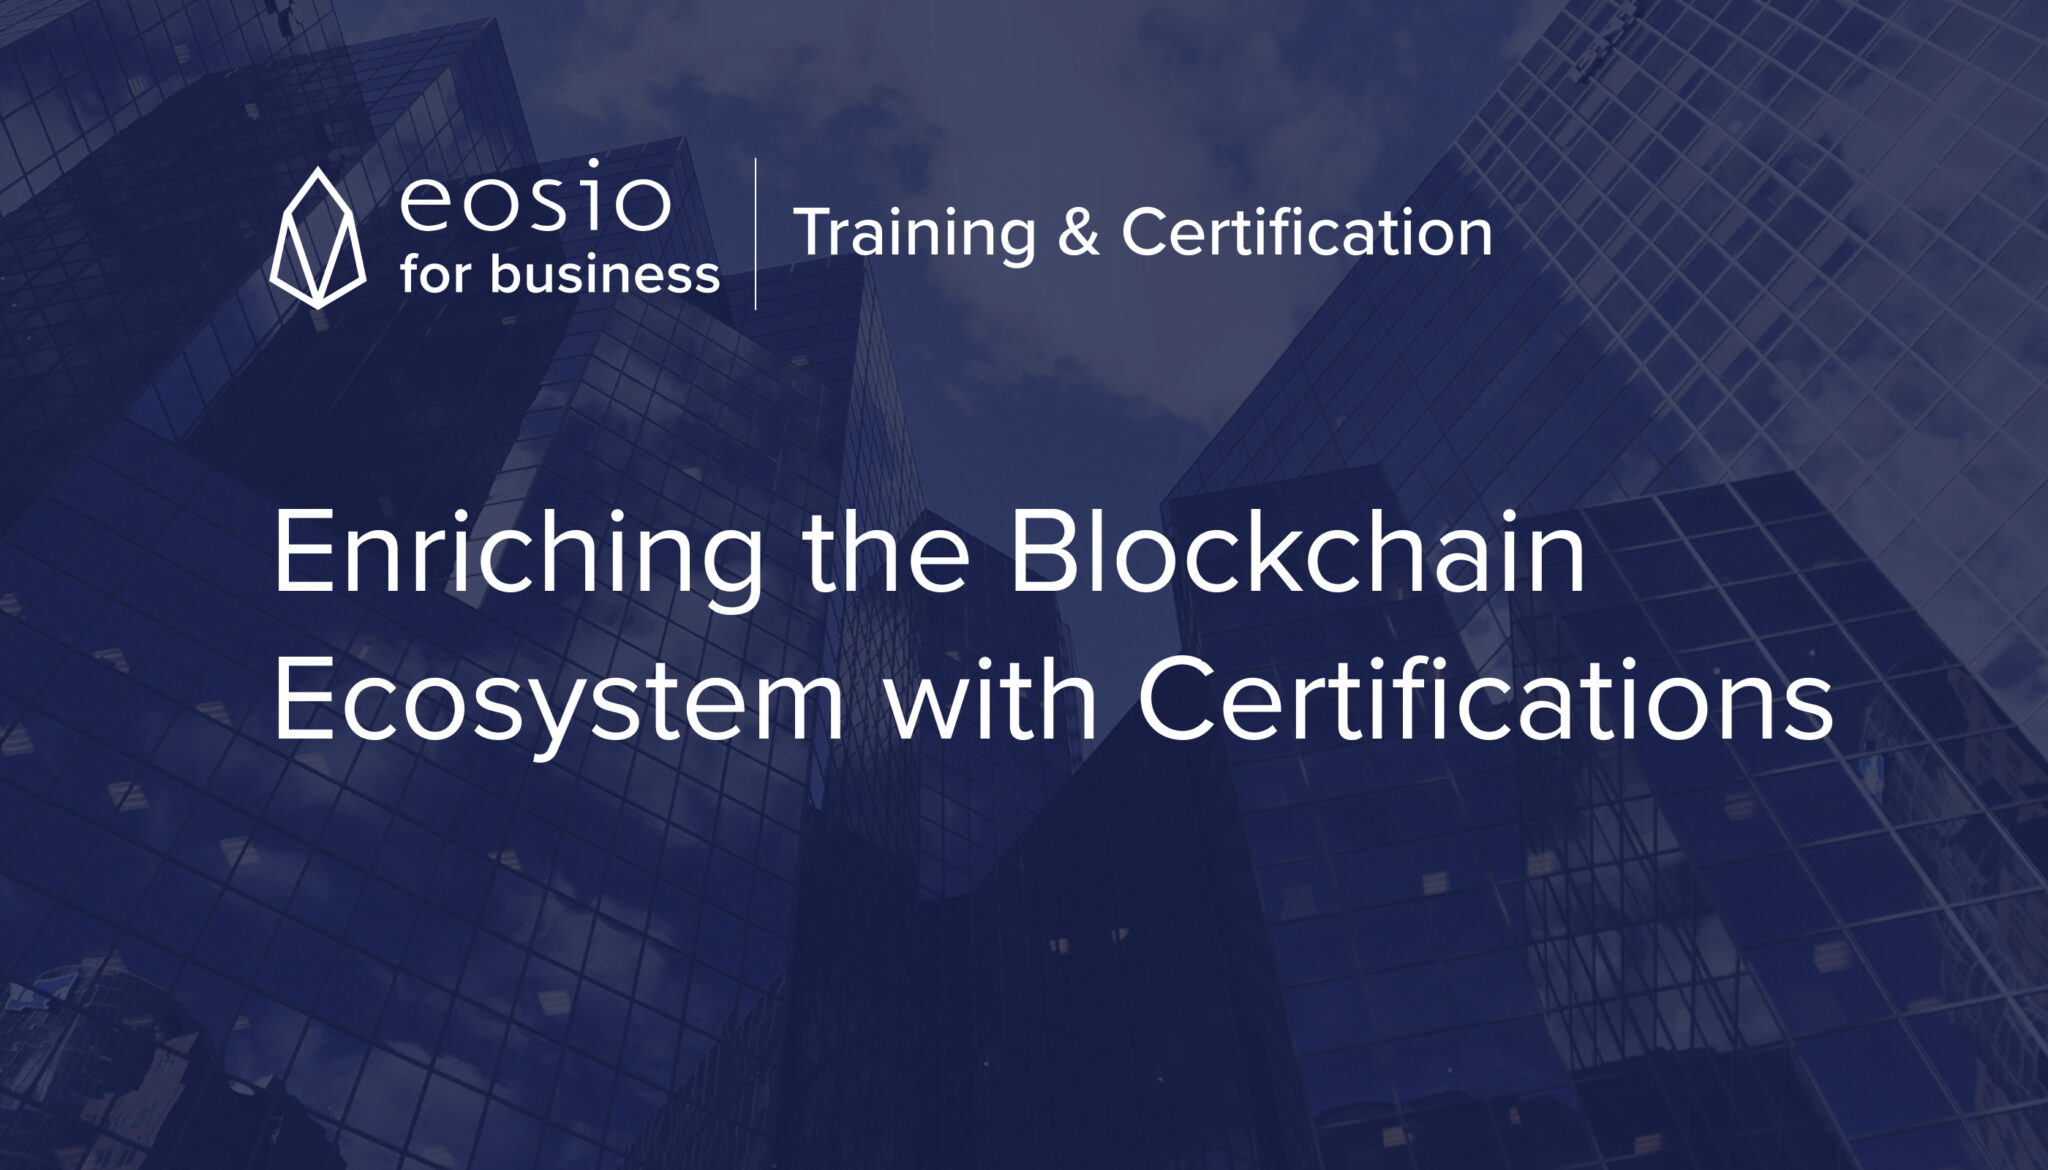 EOSIO Training and Certification Courses by Block.One